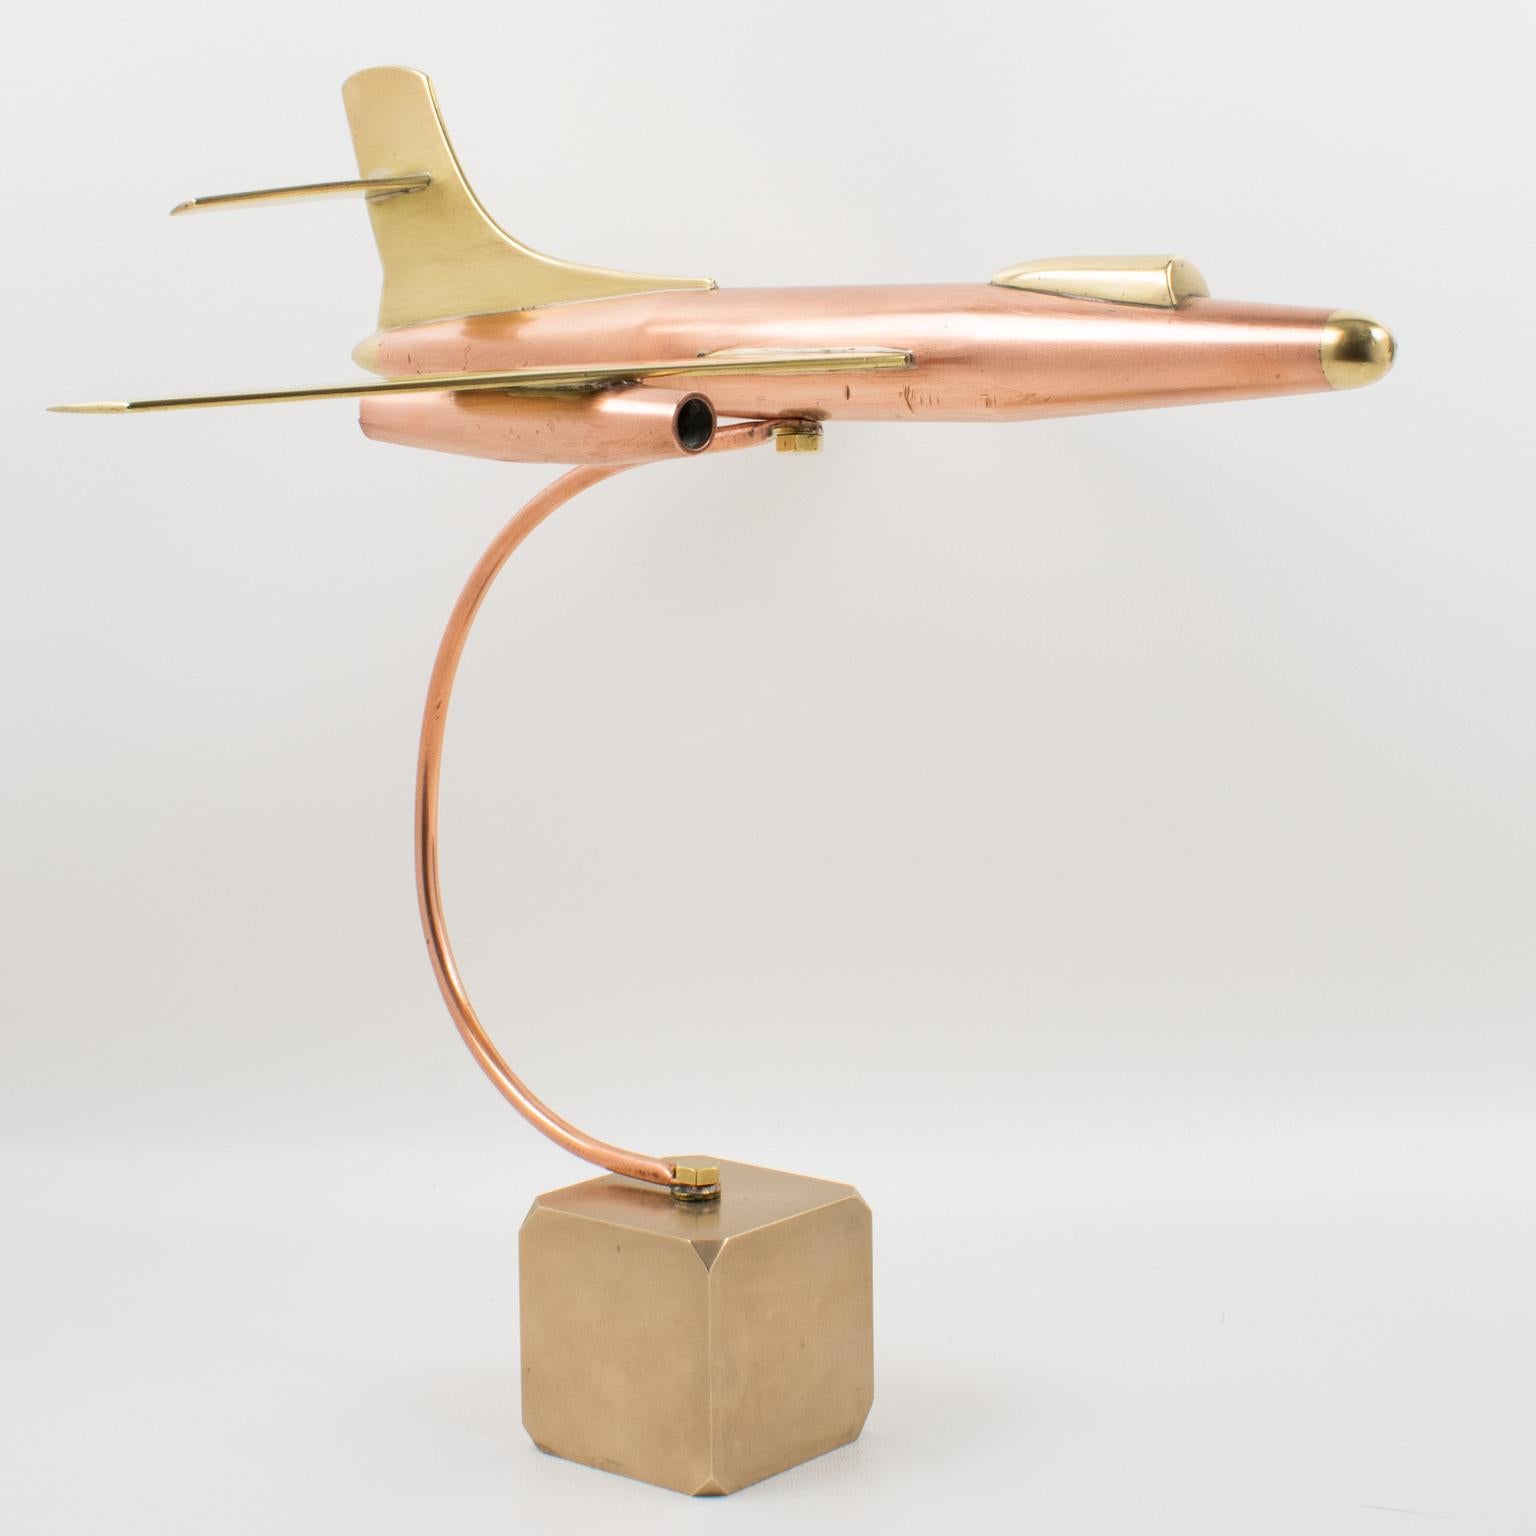 French Brass and Copper Airplane Jet Aviation Model, France 1960s For Sale